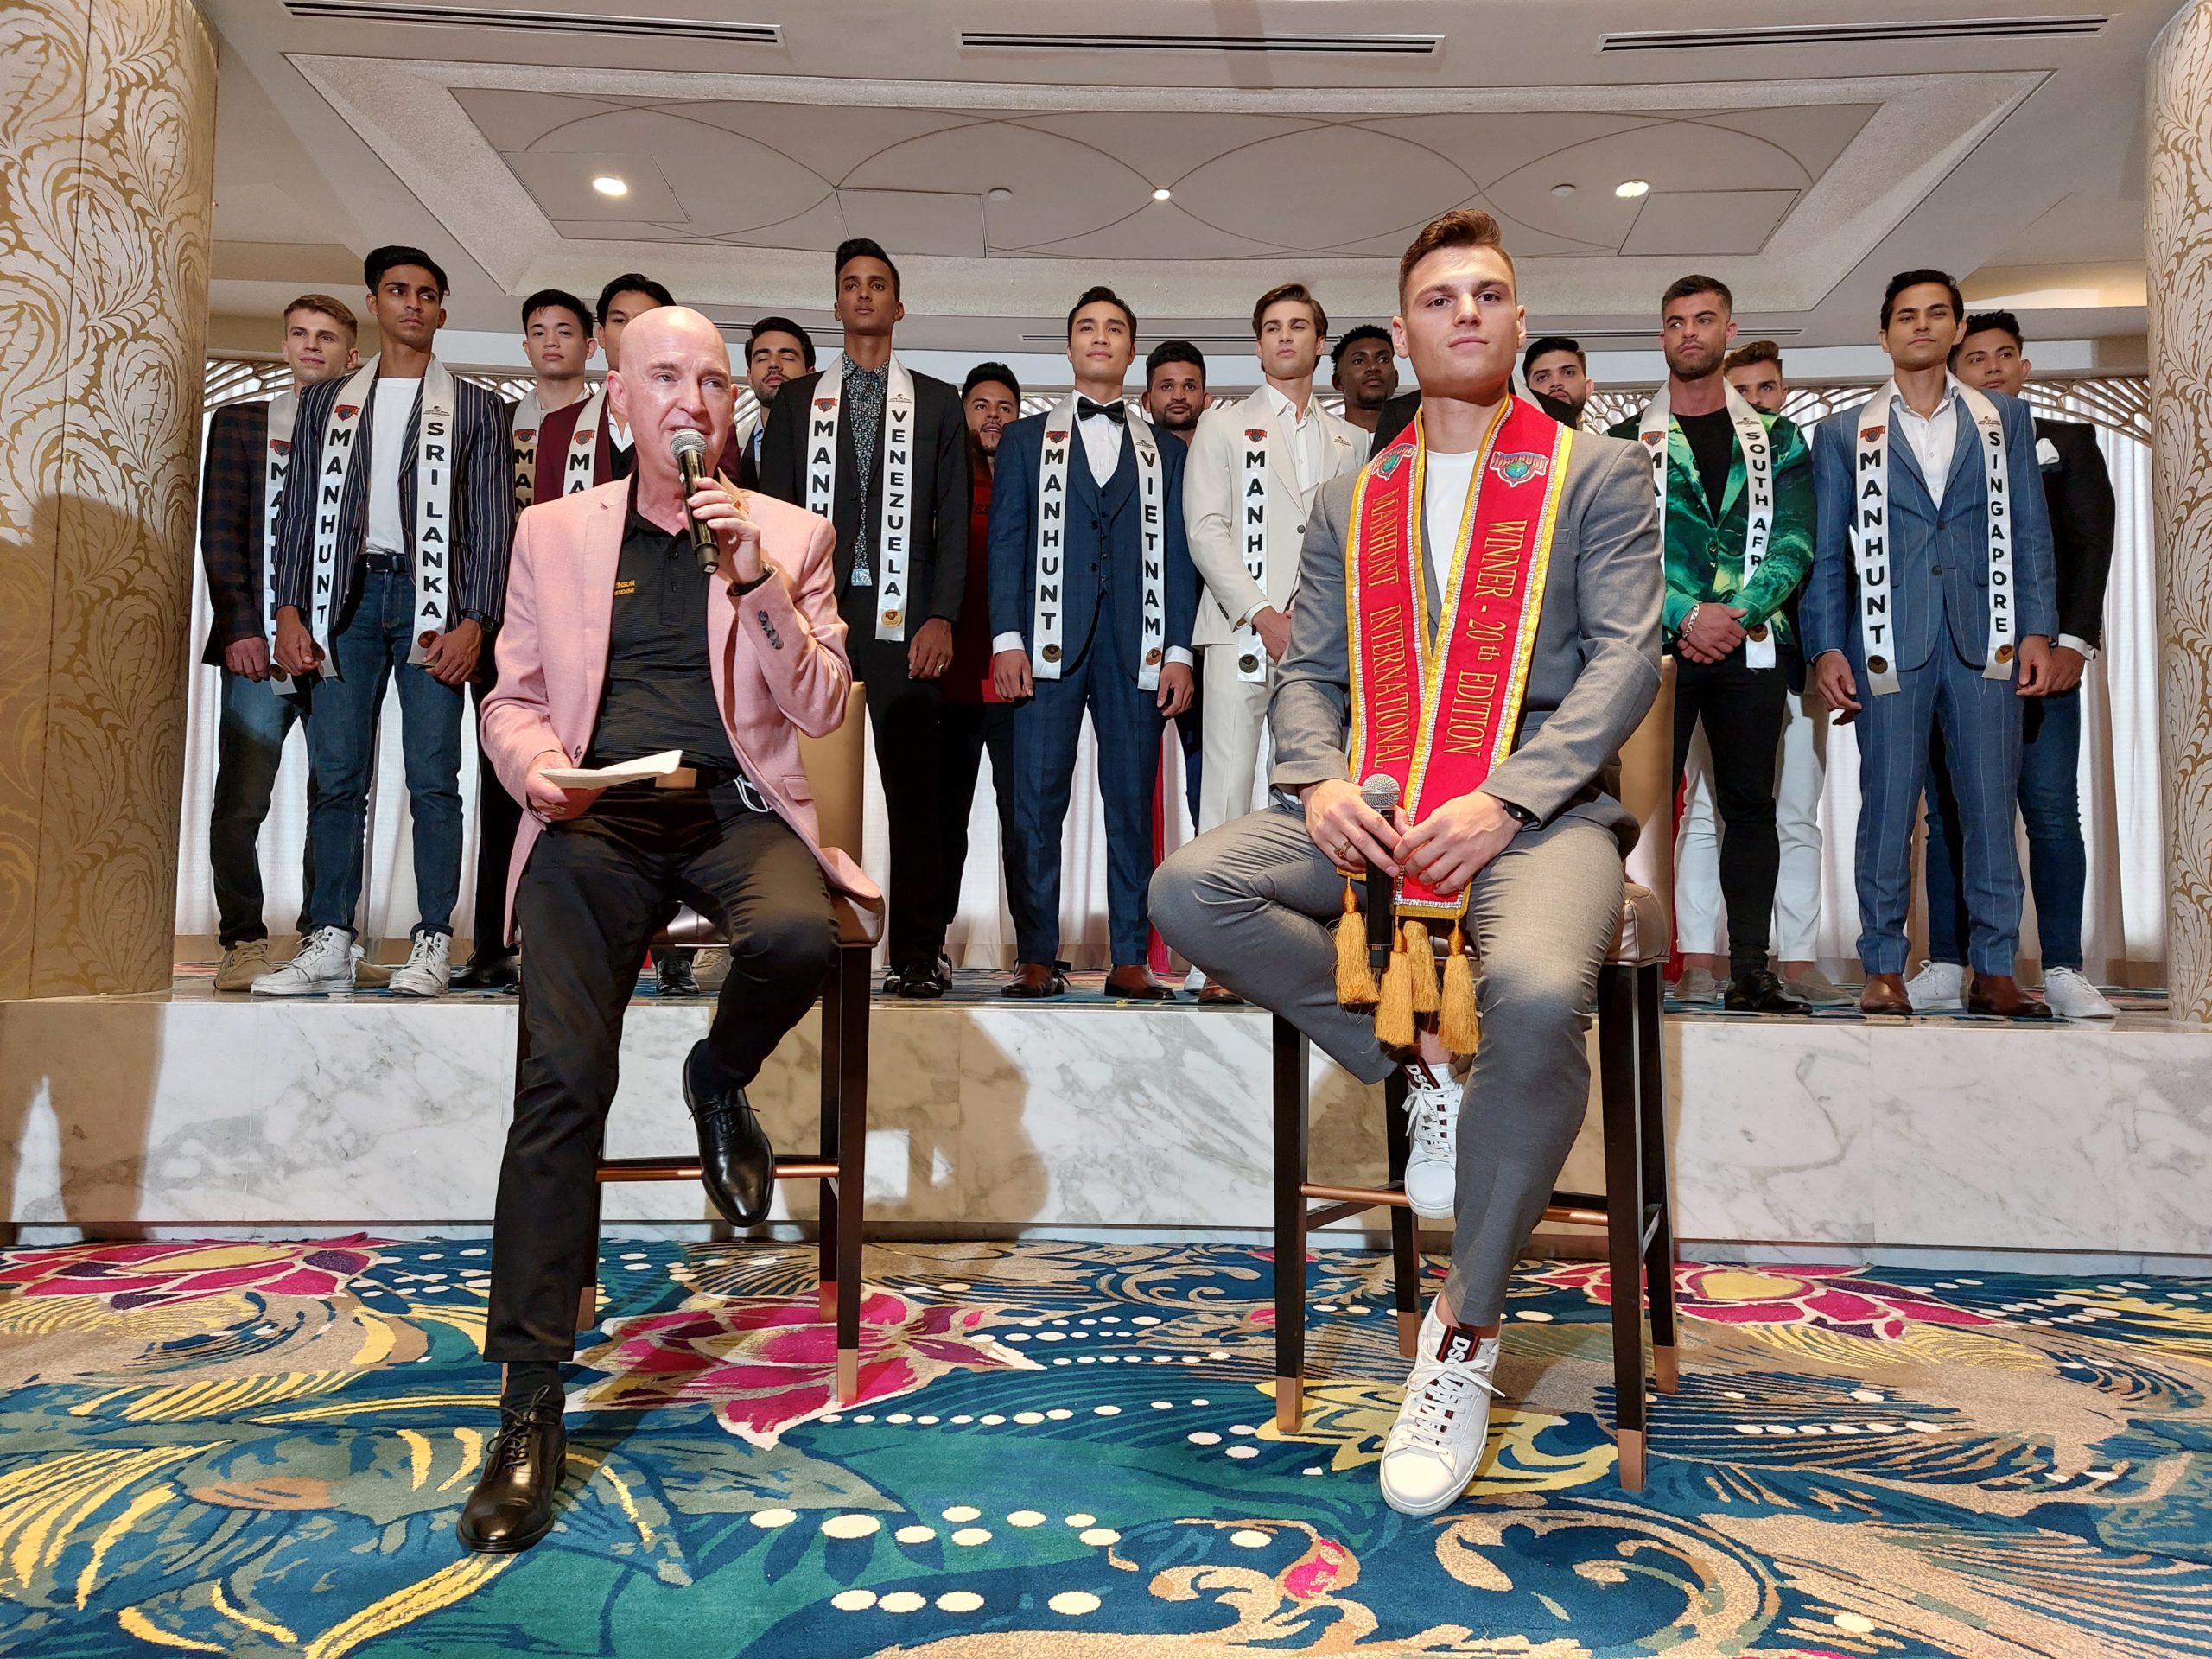 Manhunt International Executive President Rosko Dickinson (seated, left) joins current winner Paul Luzineau of the Netherlands (seated, right) at the presentation of the 2022 contestants